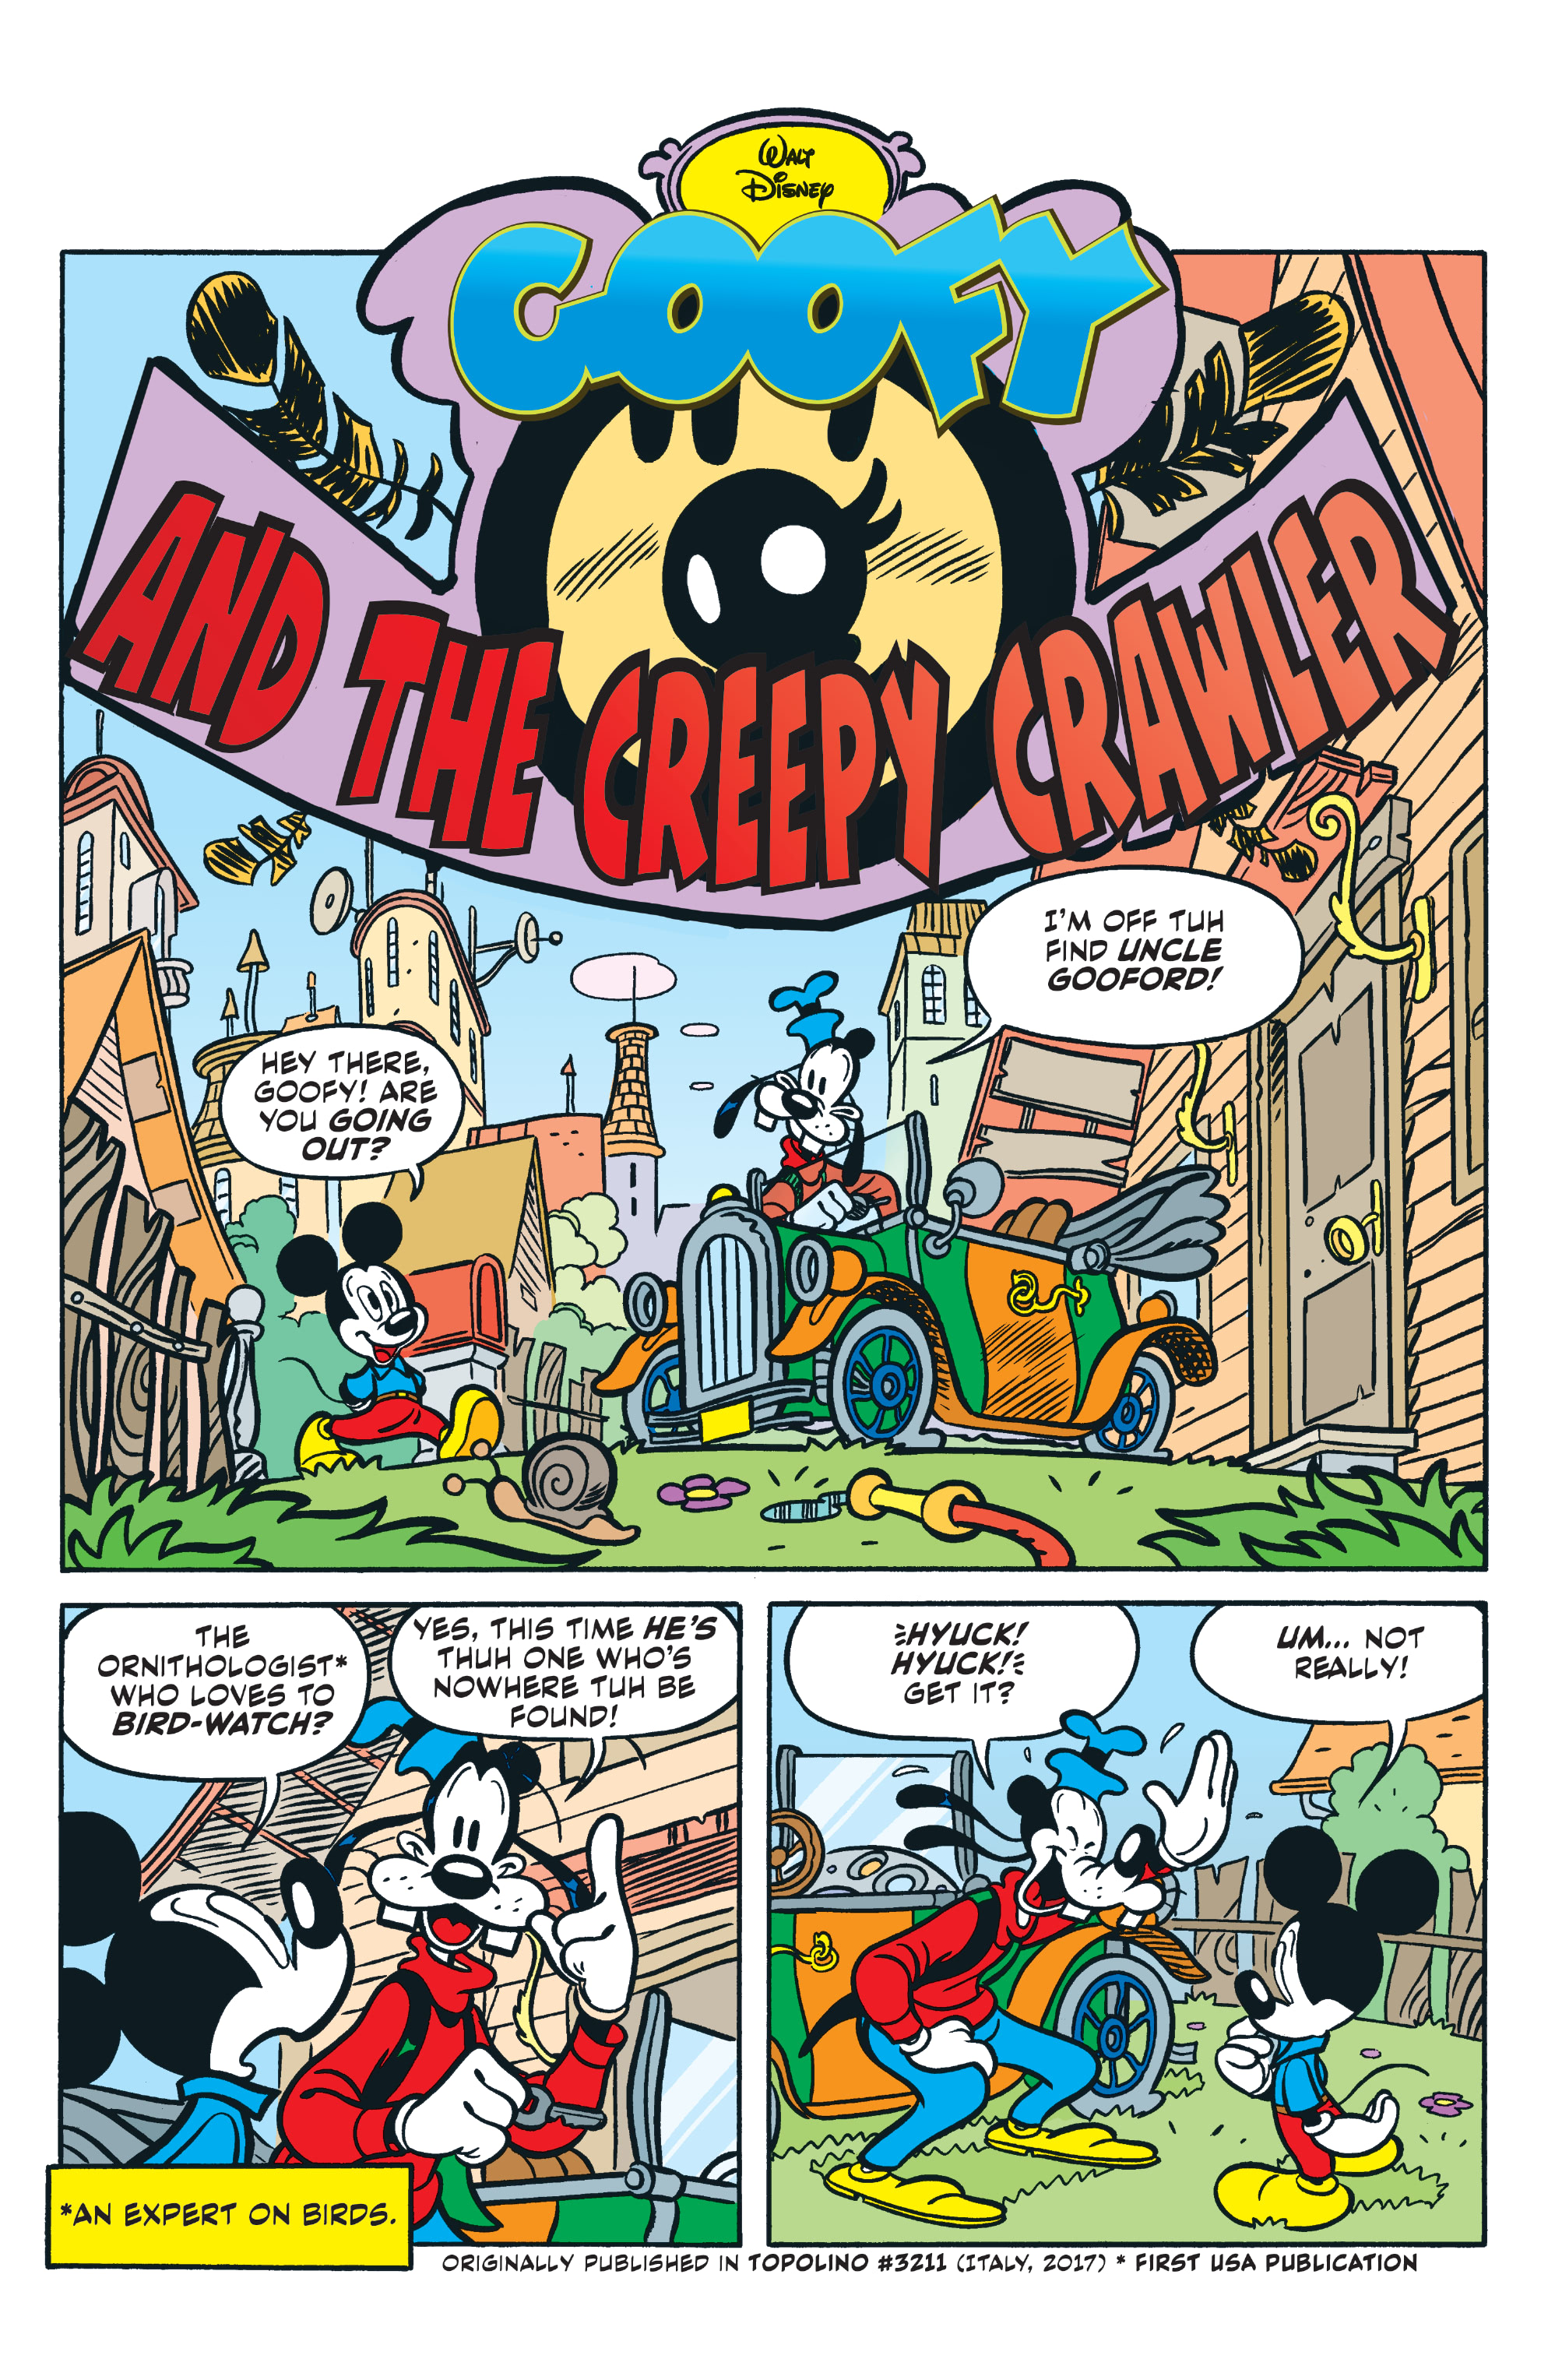 Disney Comics and Stories (2018-): Chapter 12 - Page 3